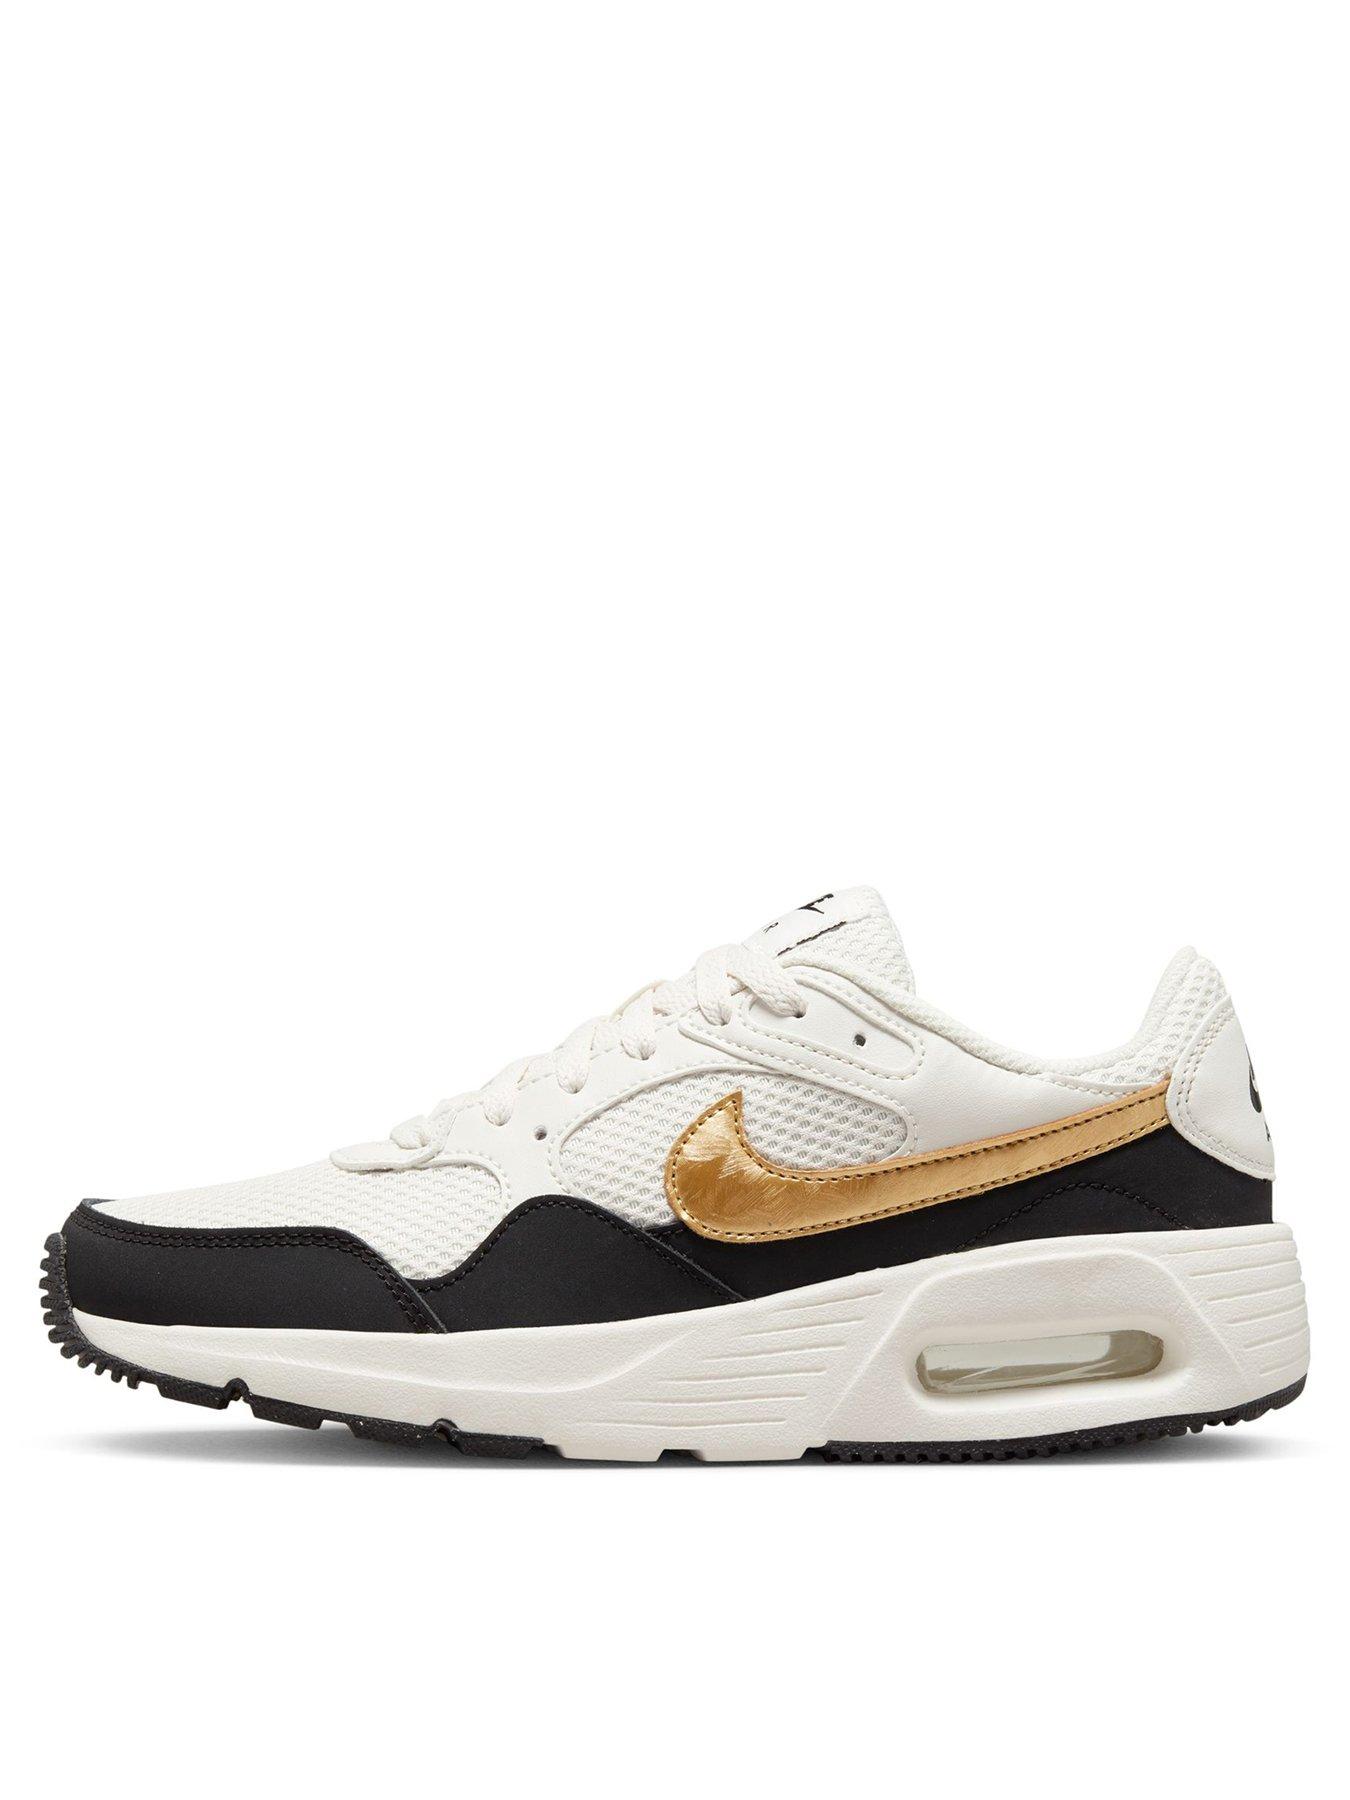 Nike Air Max SC SE Trainers - Beige | very.co.uk